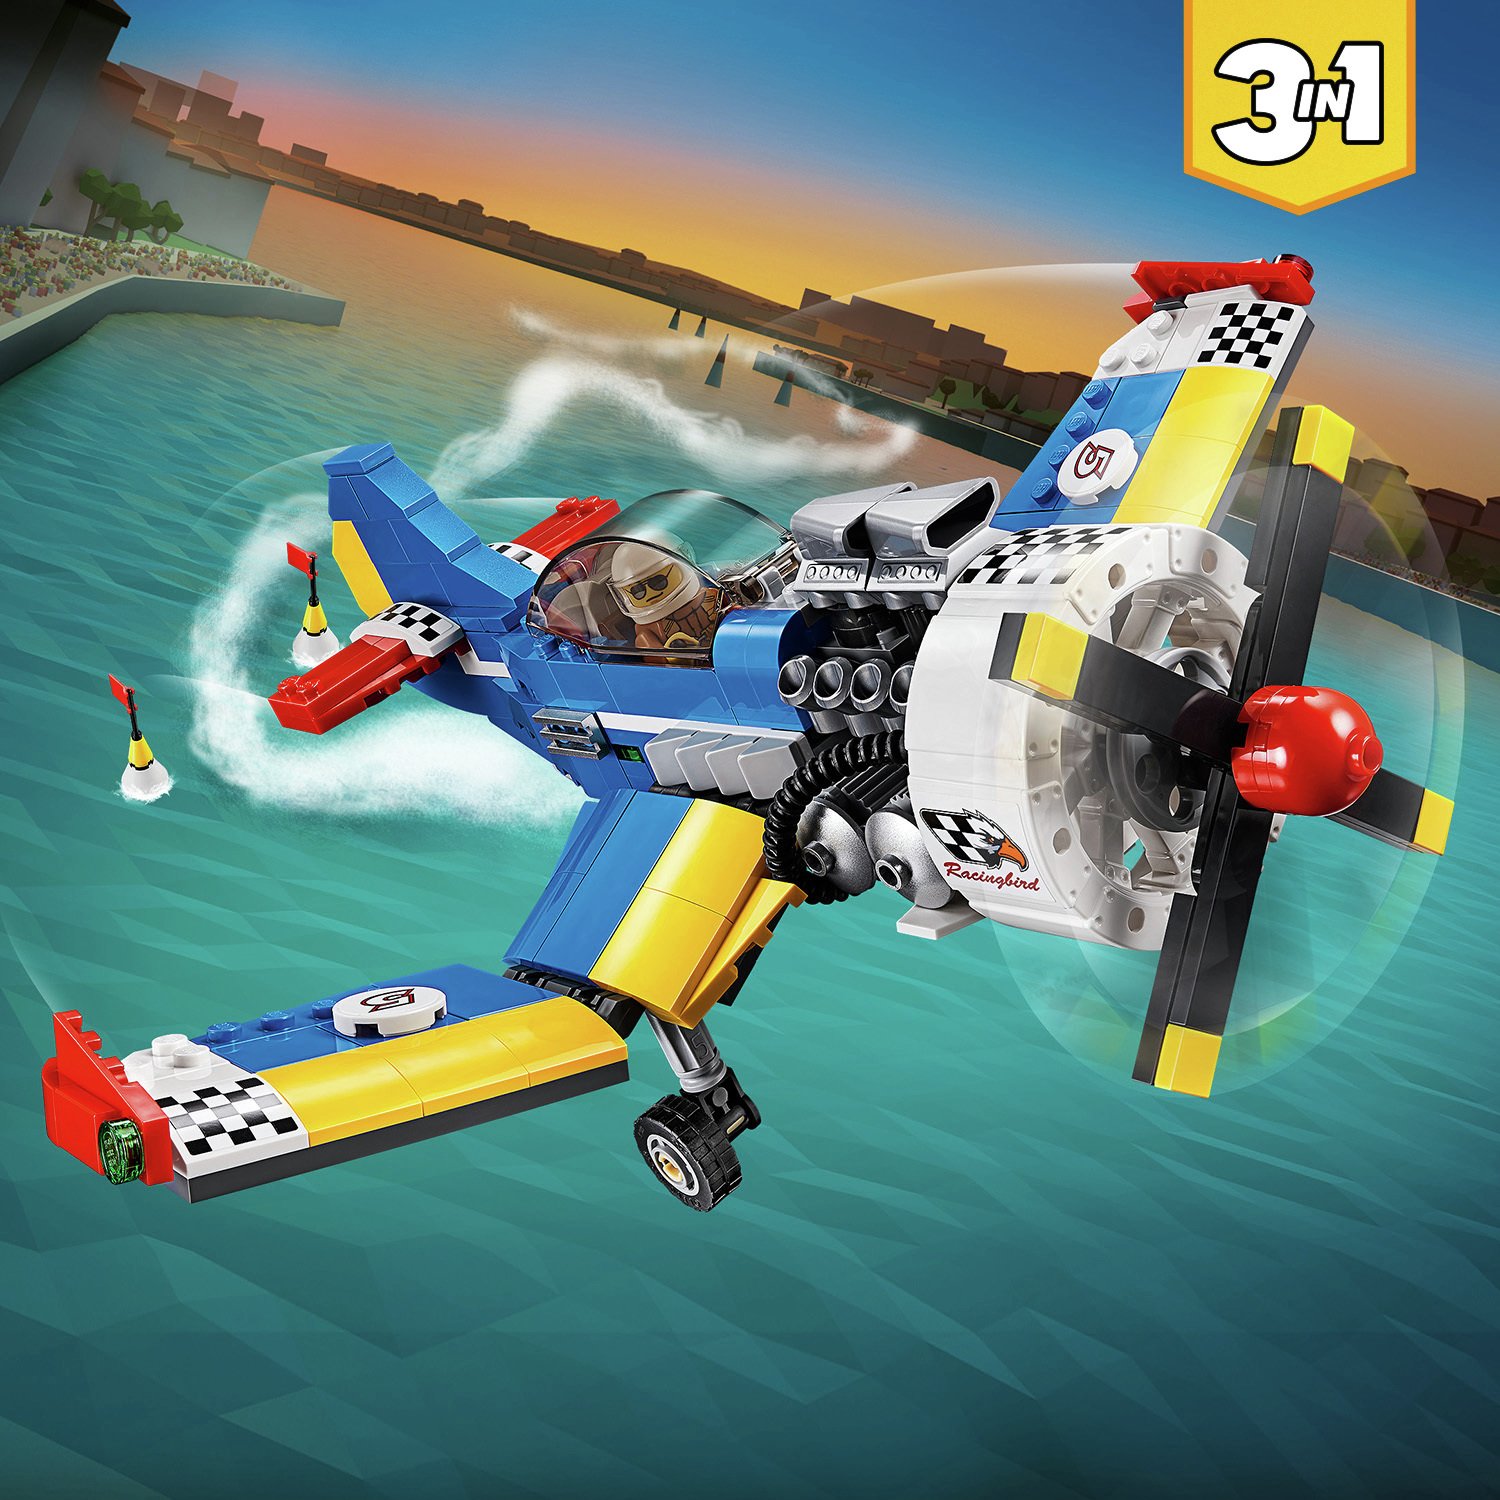 LEGO Creator Race Plane Toy Helicopter and Jet Review